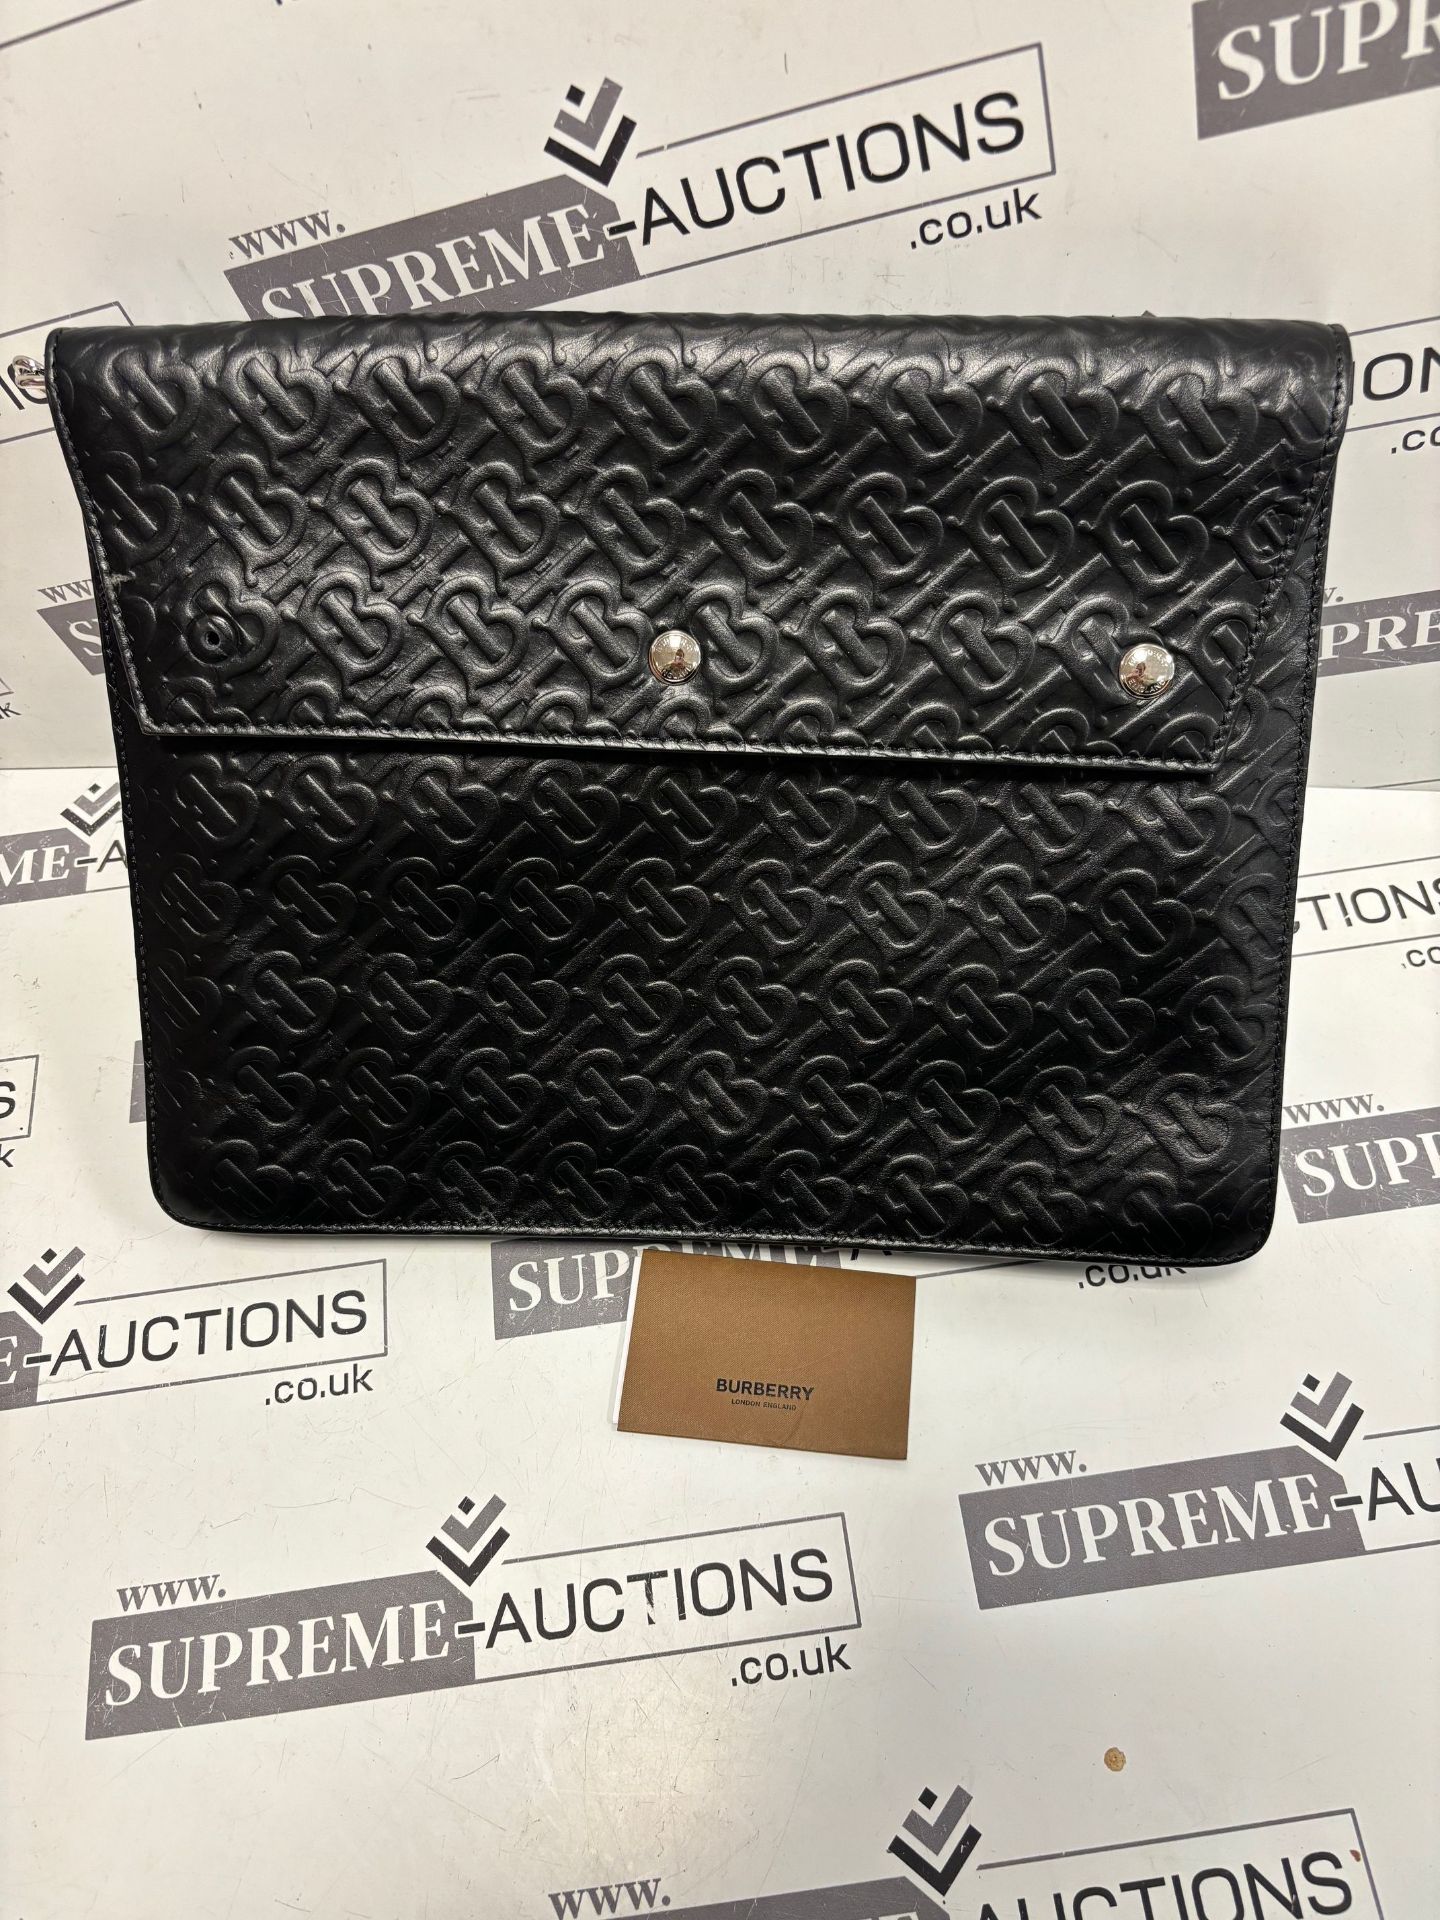 (No Vat) Burberry Envelope clutch, TB embossed leather, Black colour approx 27x35cm. - Image 6 of 7